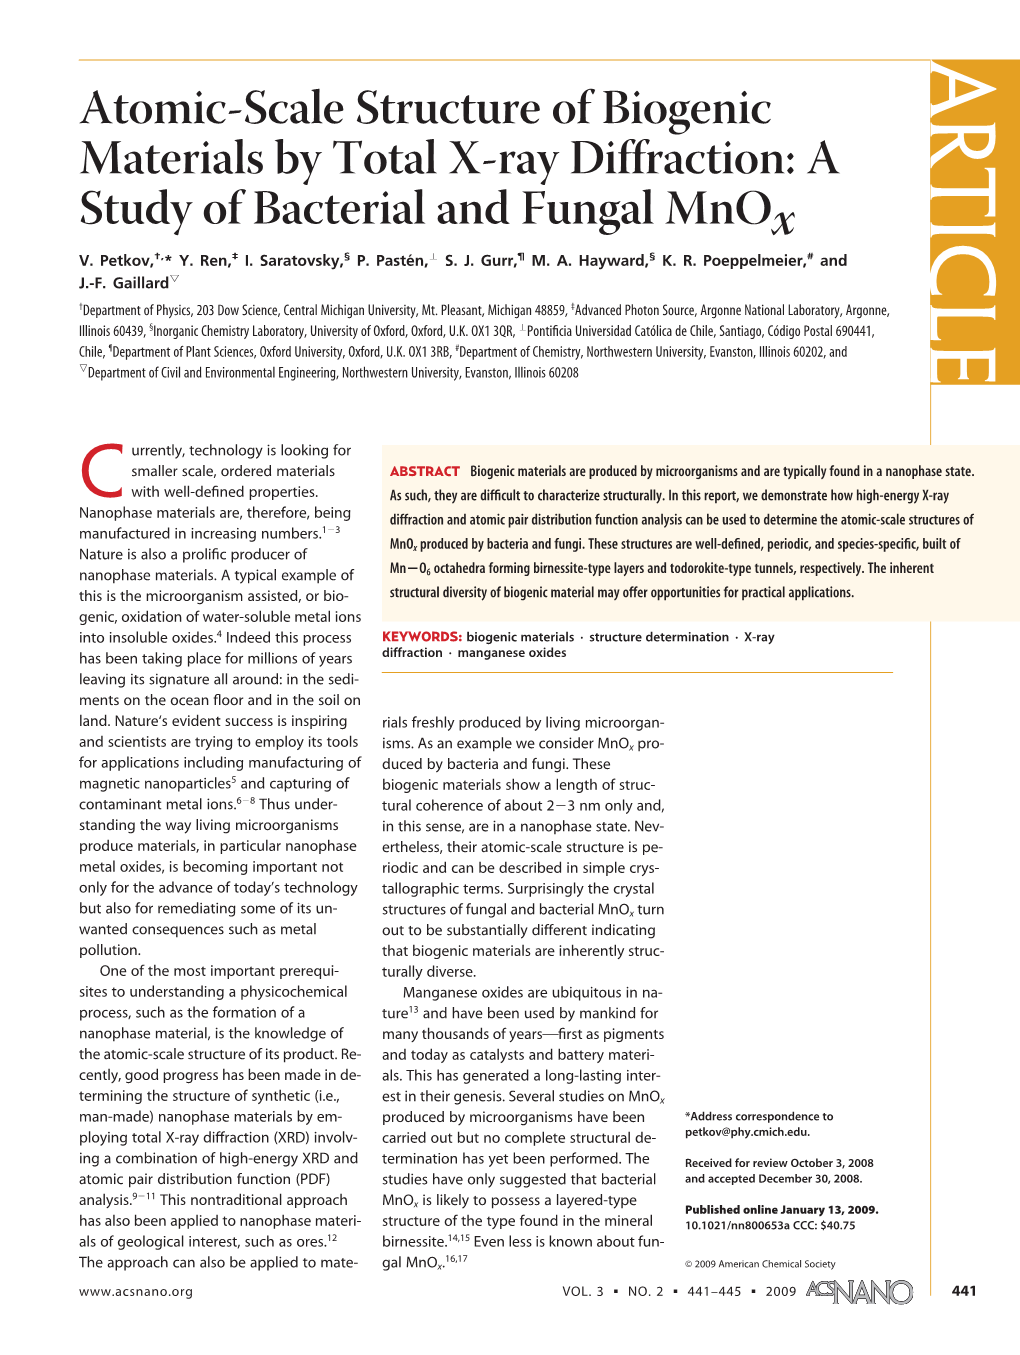 Atomic-Scale Structure of Biogenic Materials by Total X-Ray Diffraction: a Study of Bacterial and Fungal Mnox V